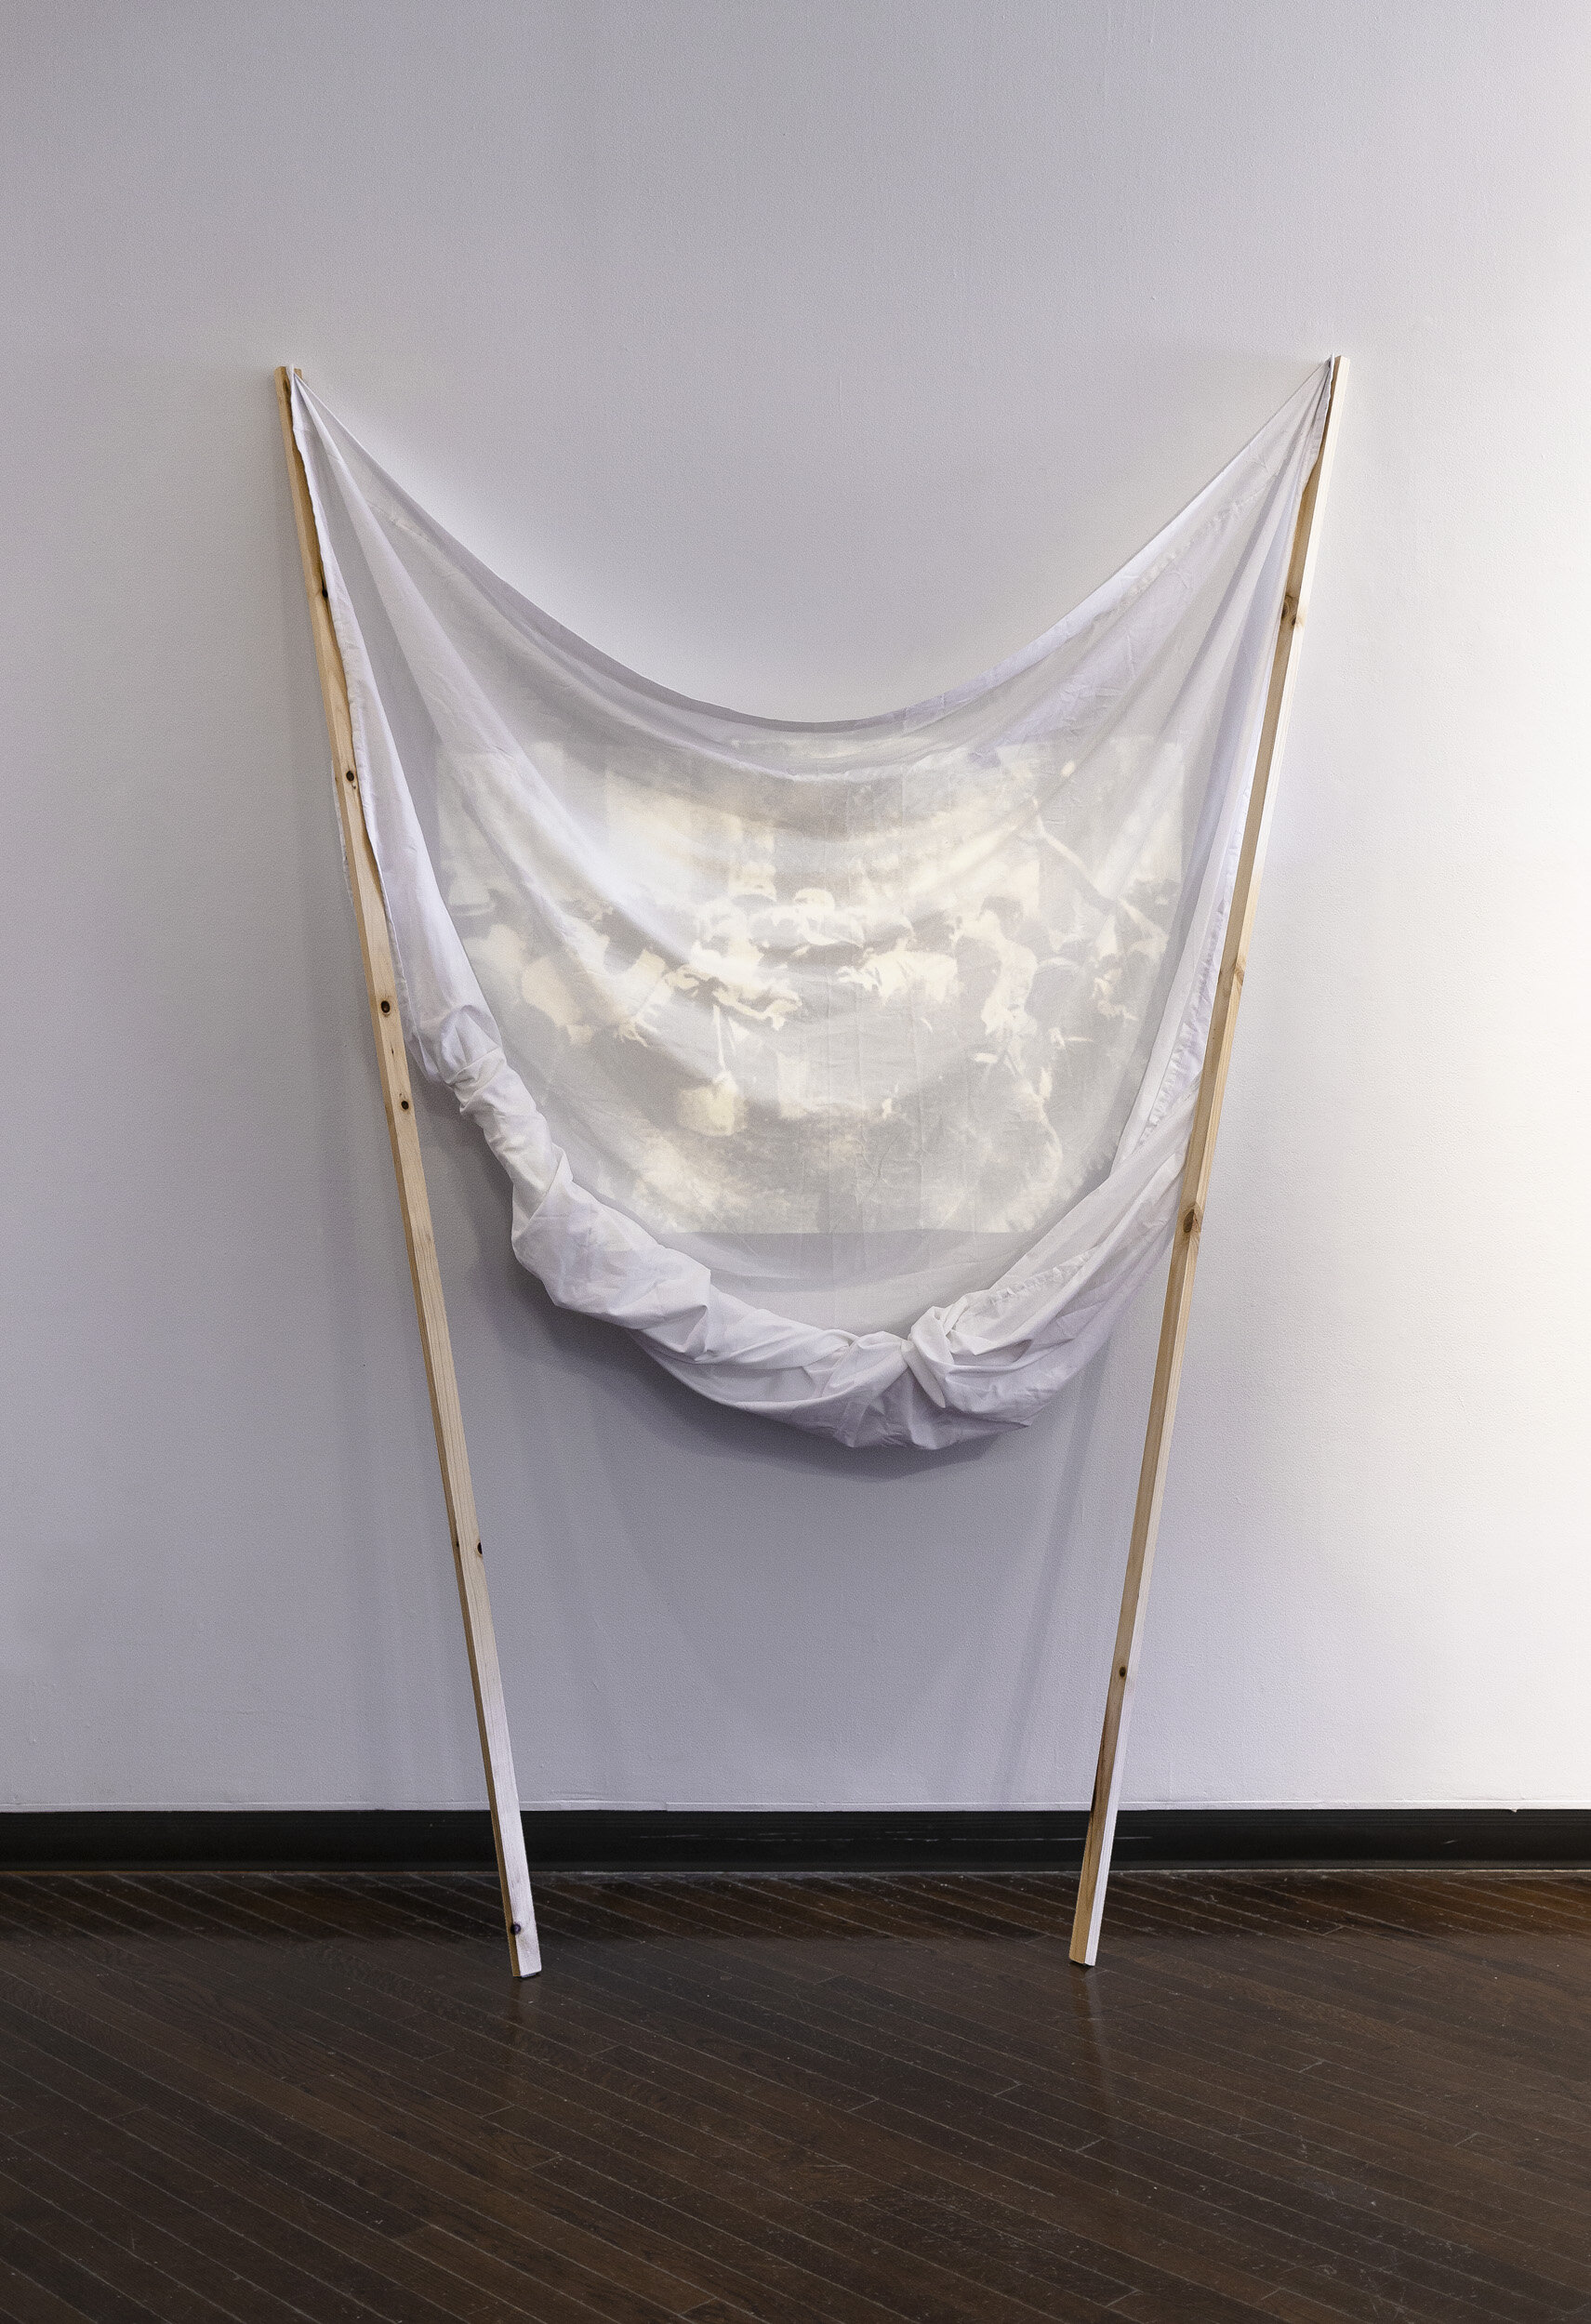  In the Water , 7 x 6 x 2 feet, Installation: White fabric, wood and 35mm projector, 2015   